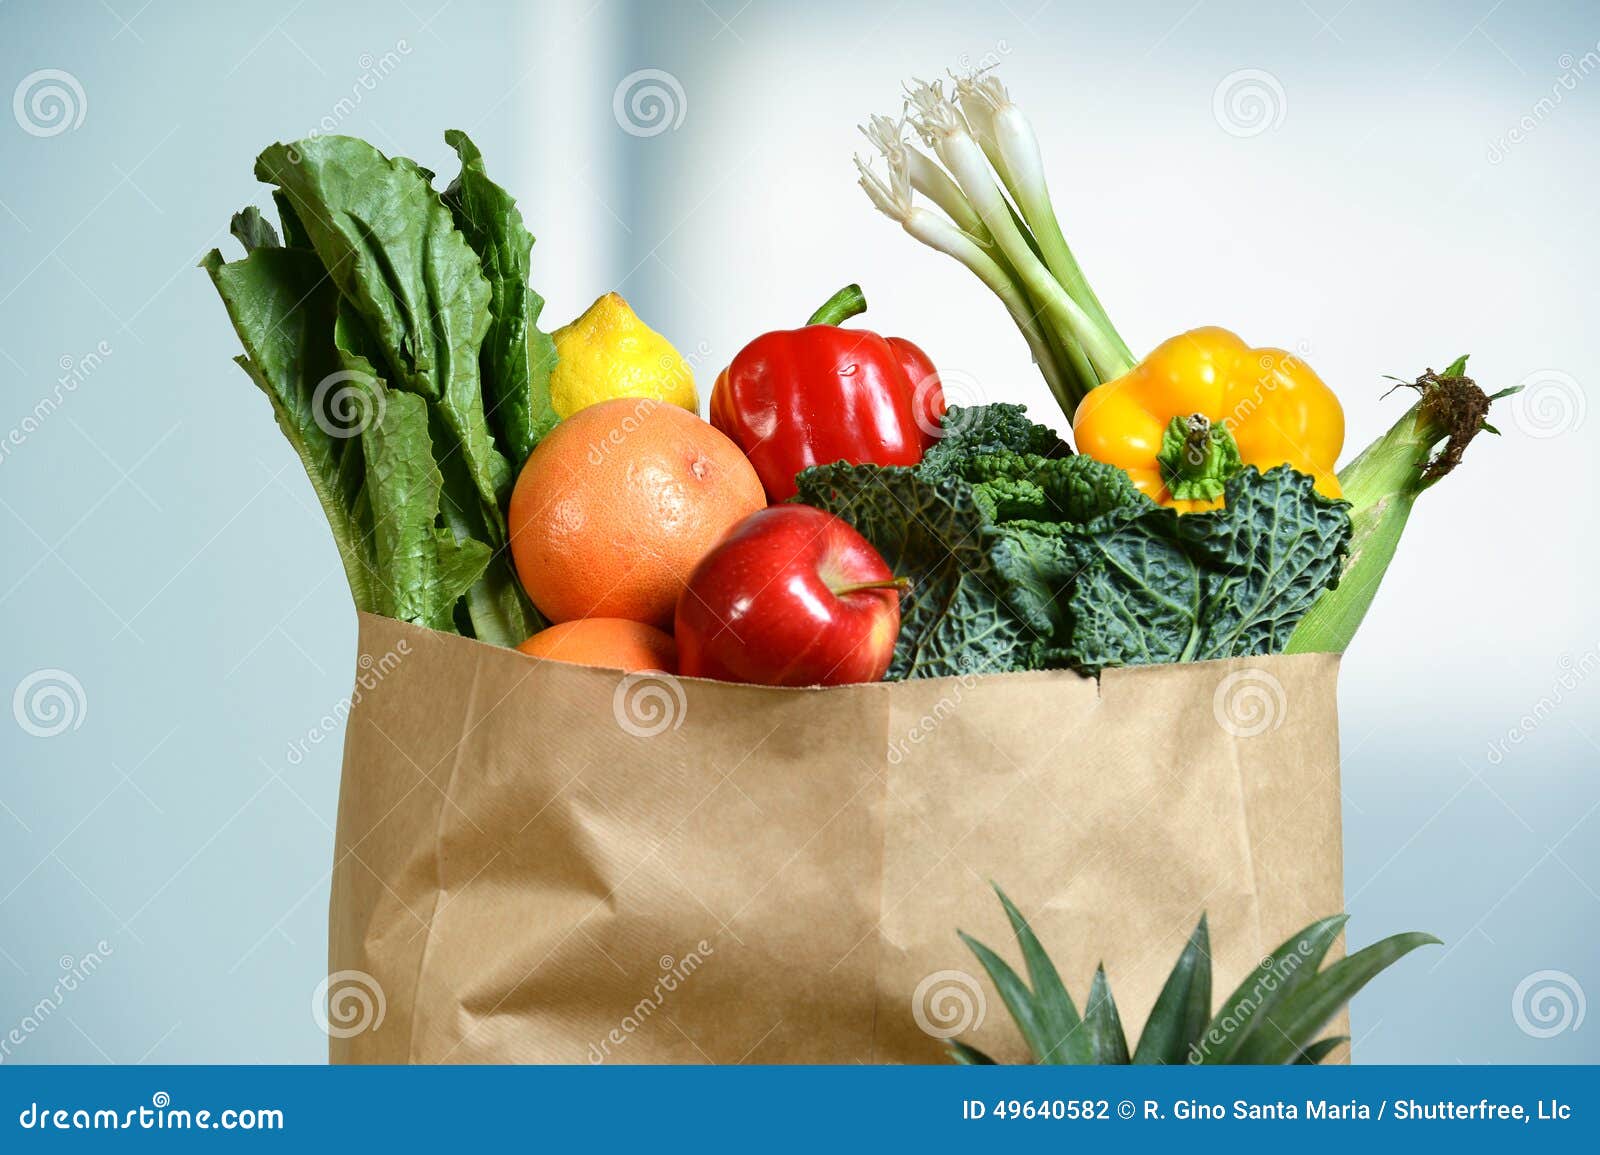 produce in grocery bag